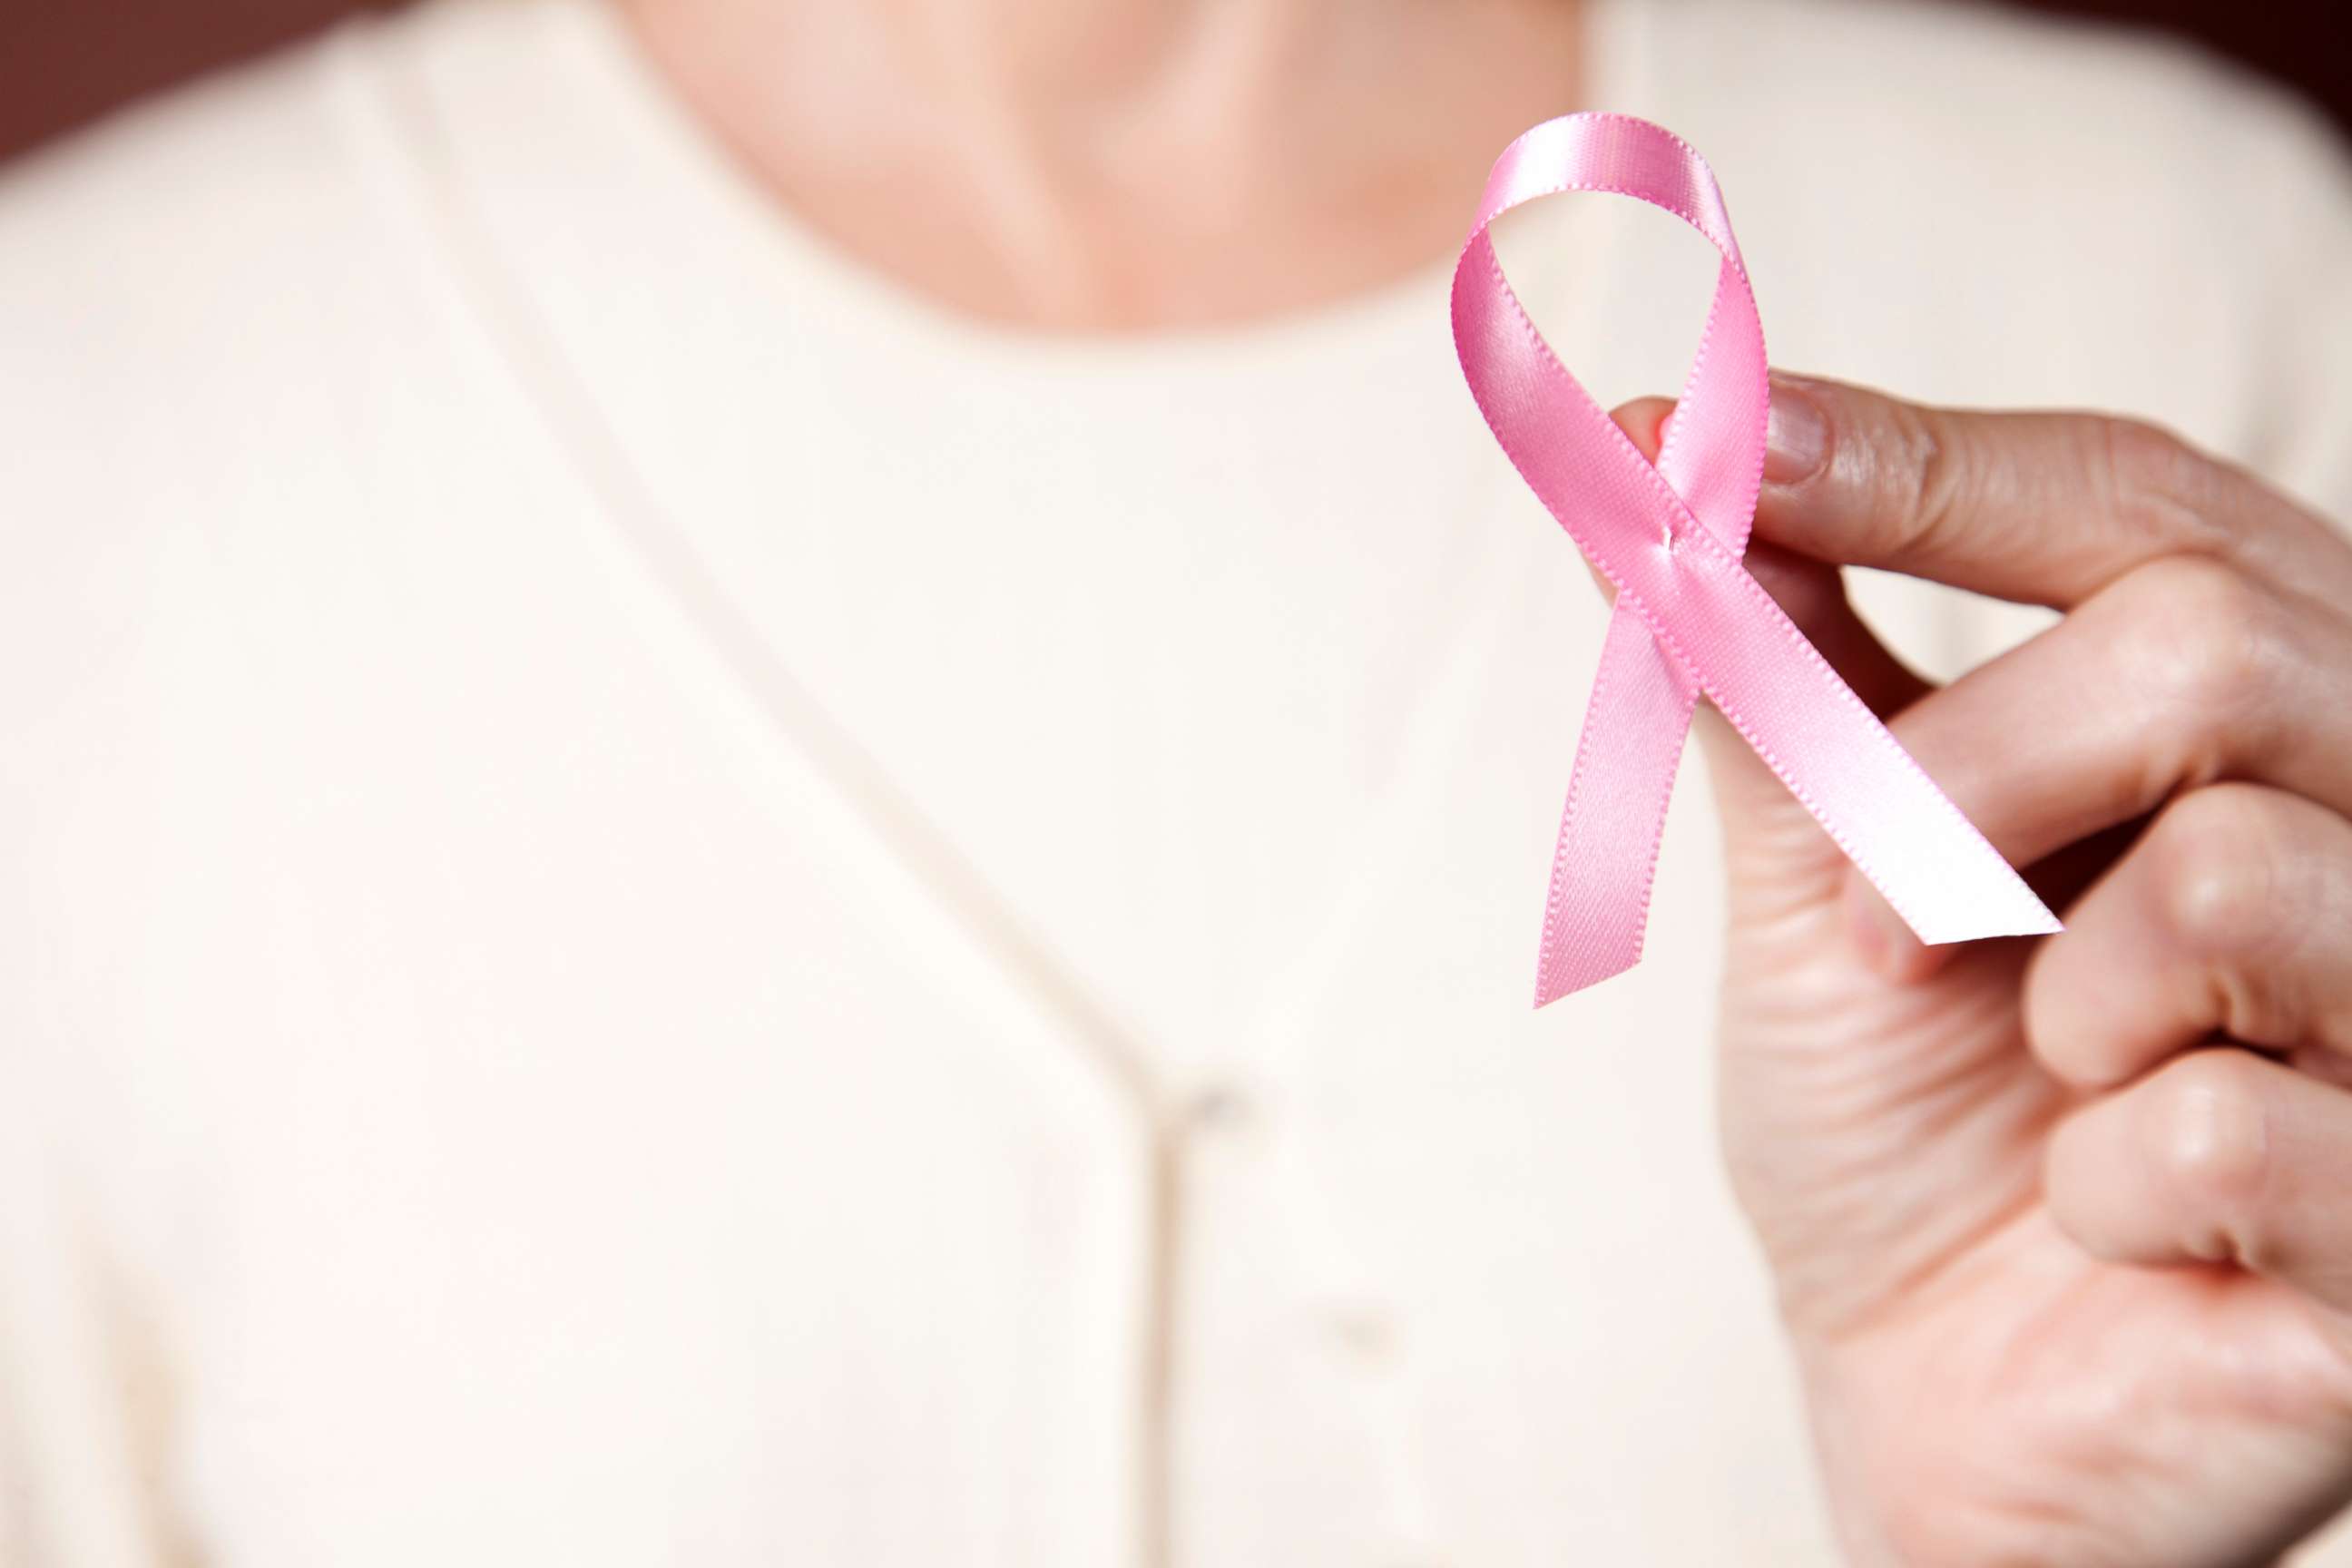 PHOTO: In this undated stock photo, a woman wearing a pink sweater holding a pink breast cancer ribbon.